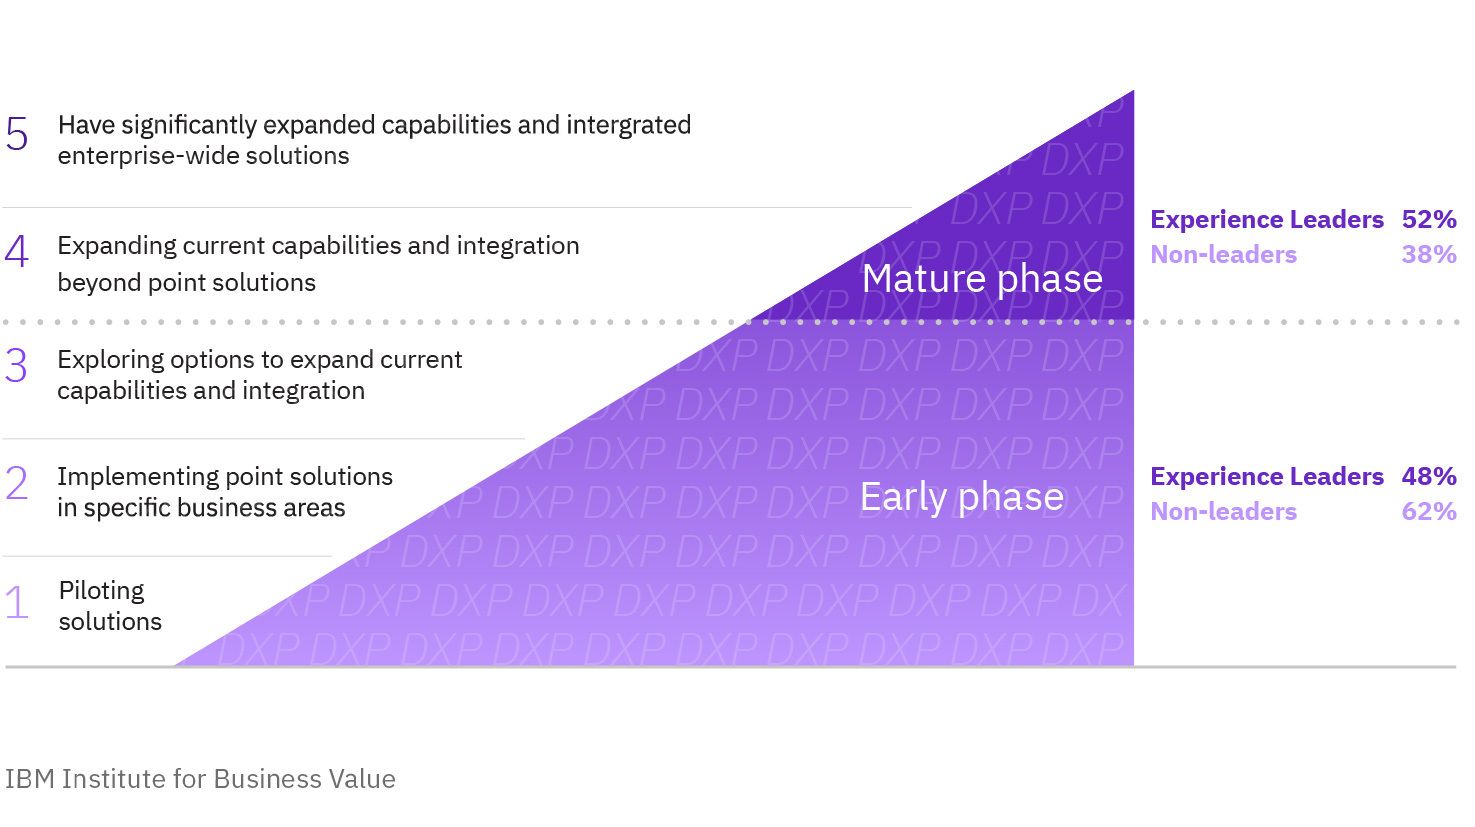 5 levels of DXP maturity: More Experience Leaders have already reached the Mature phase.